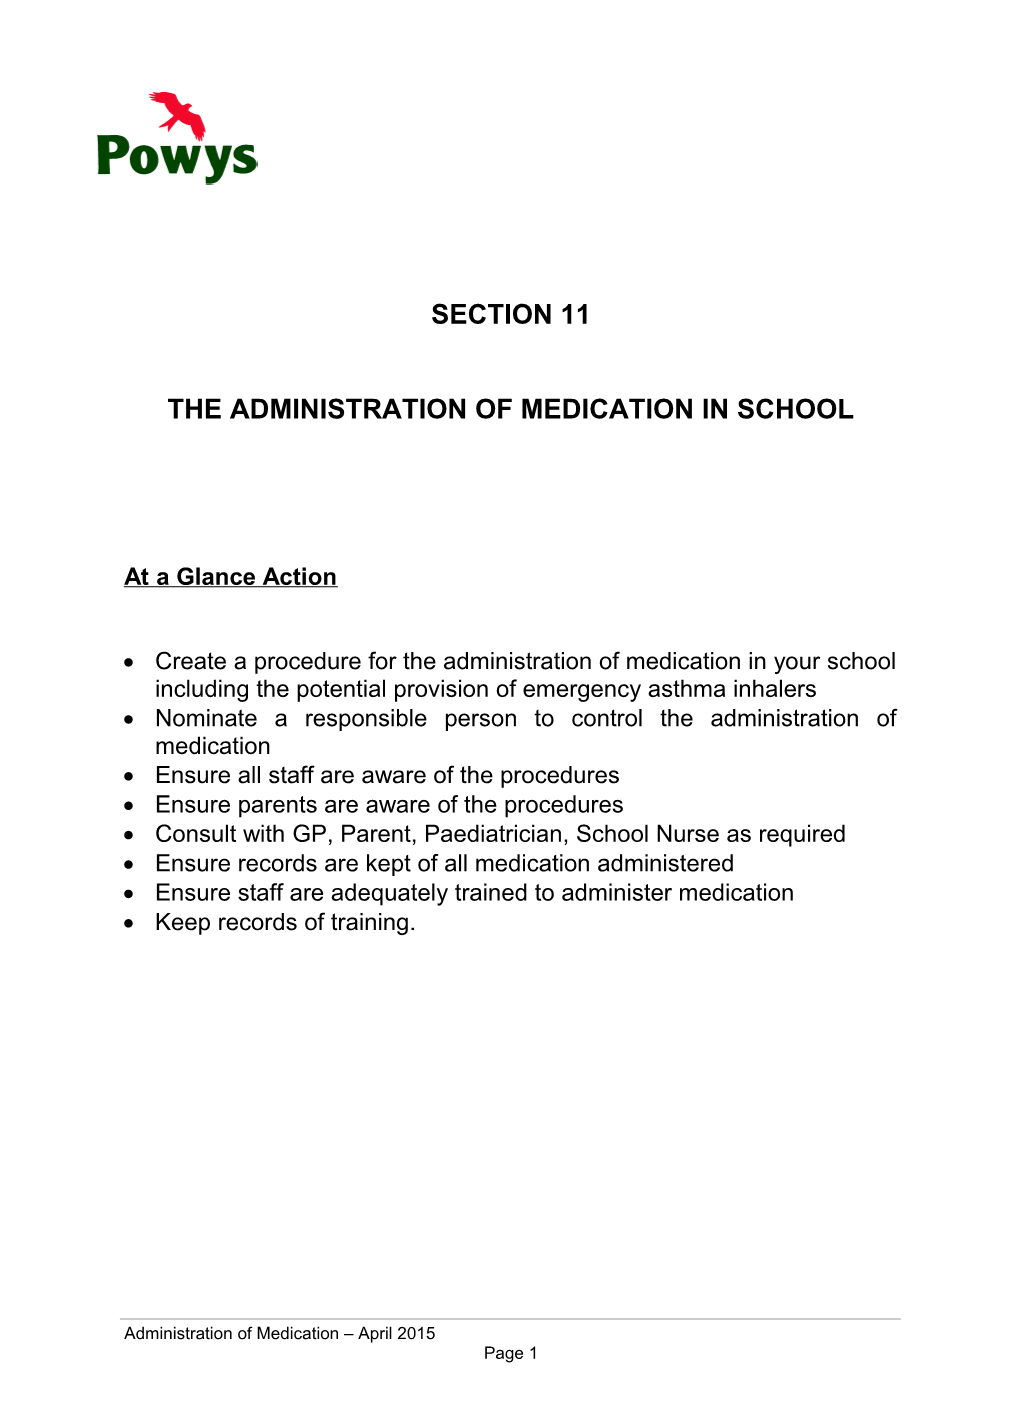 The Administration of Medication in School